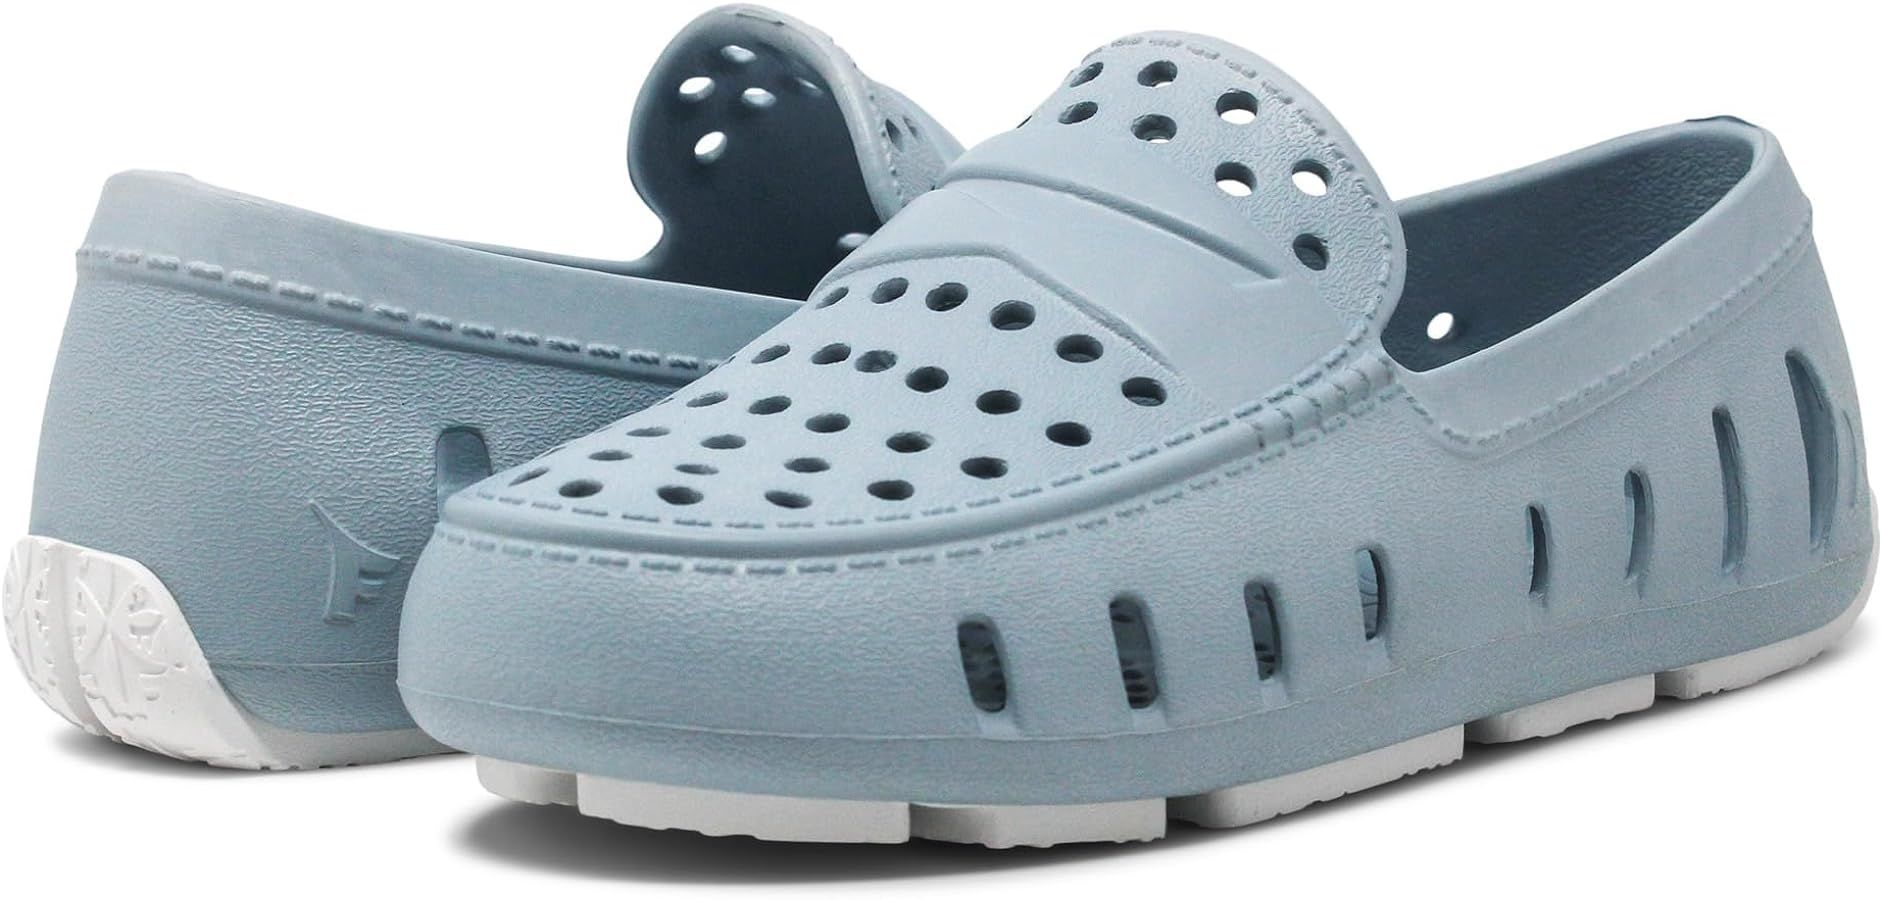 Floafers Prodigy Driver Kids’ Water Shoes | Amazon (US)